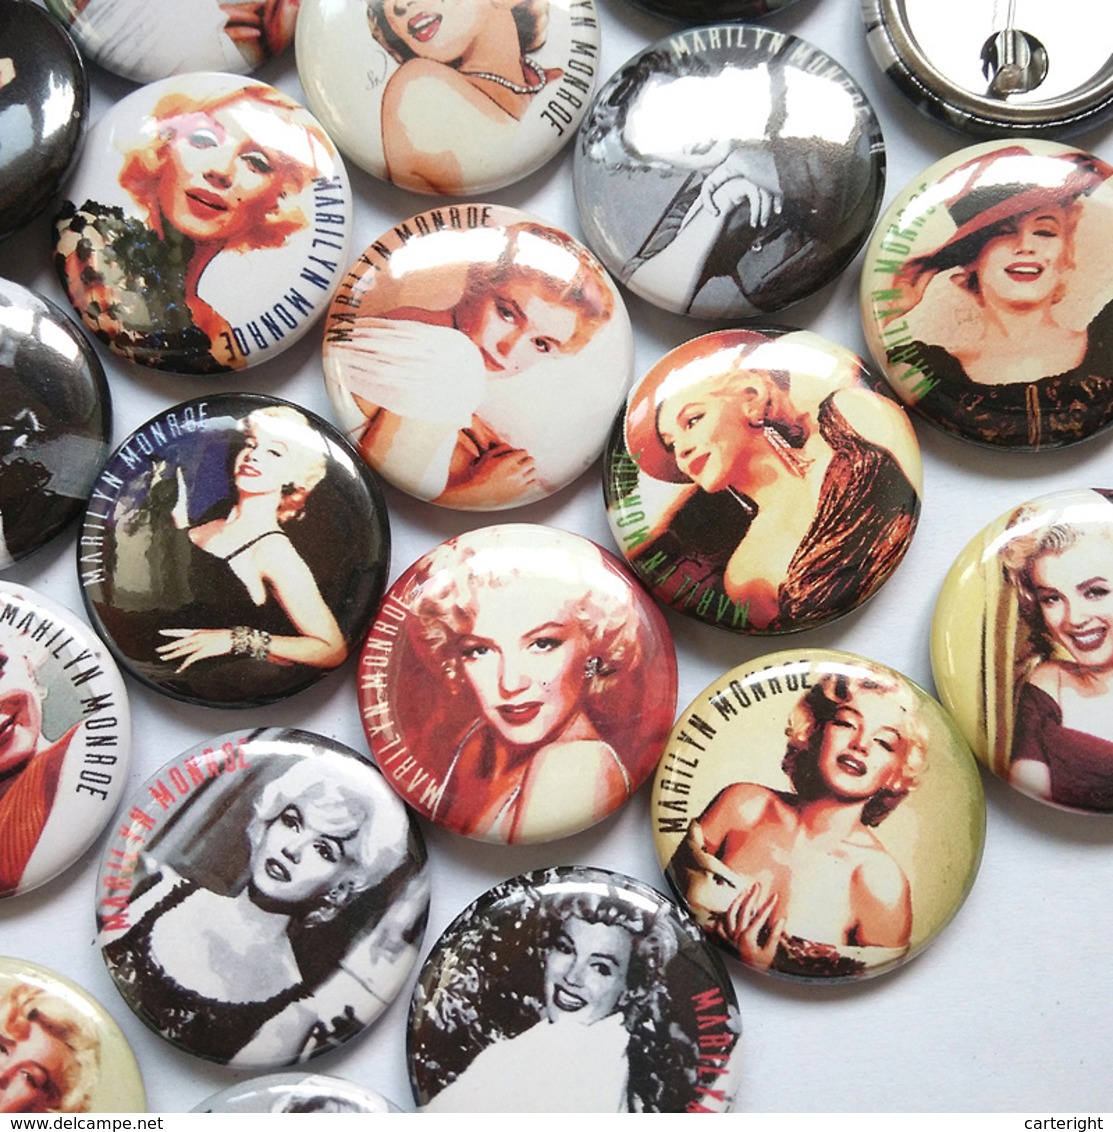 rock and roll music fan ART BADGE BUTTON PIN SET 6 (1inch/25mm diameter) 35 DIFF